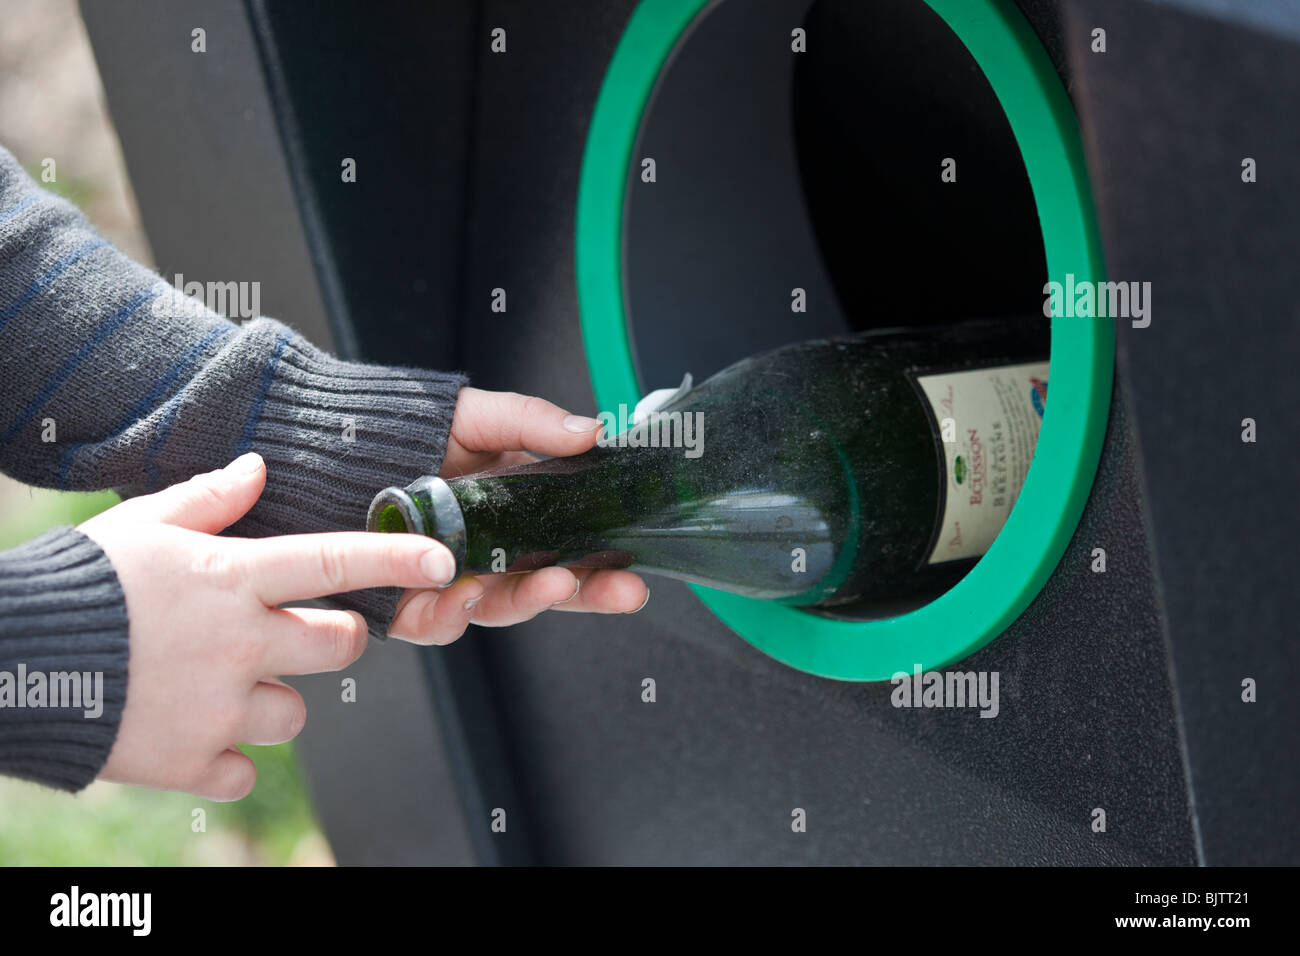 A 9 year old boy puts bottles in to a recycling bin, Switzerland. Charles Lupica Stock Photo